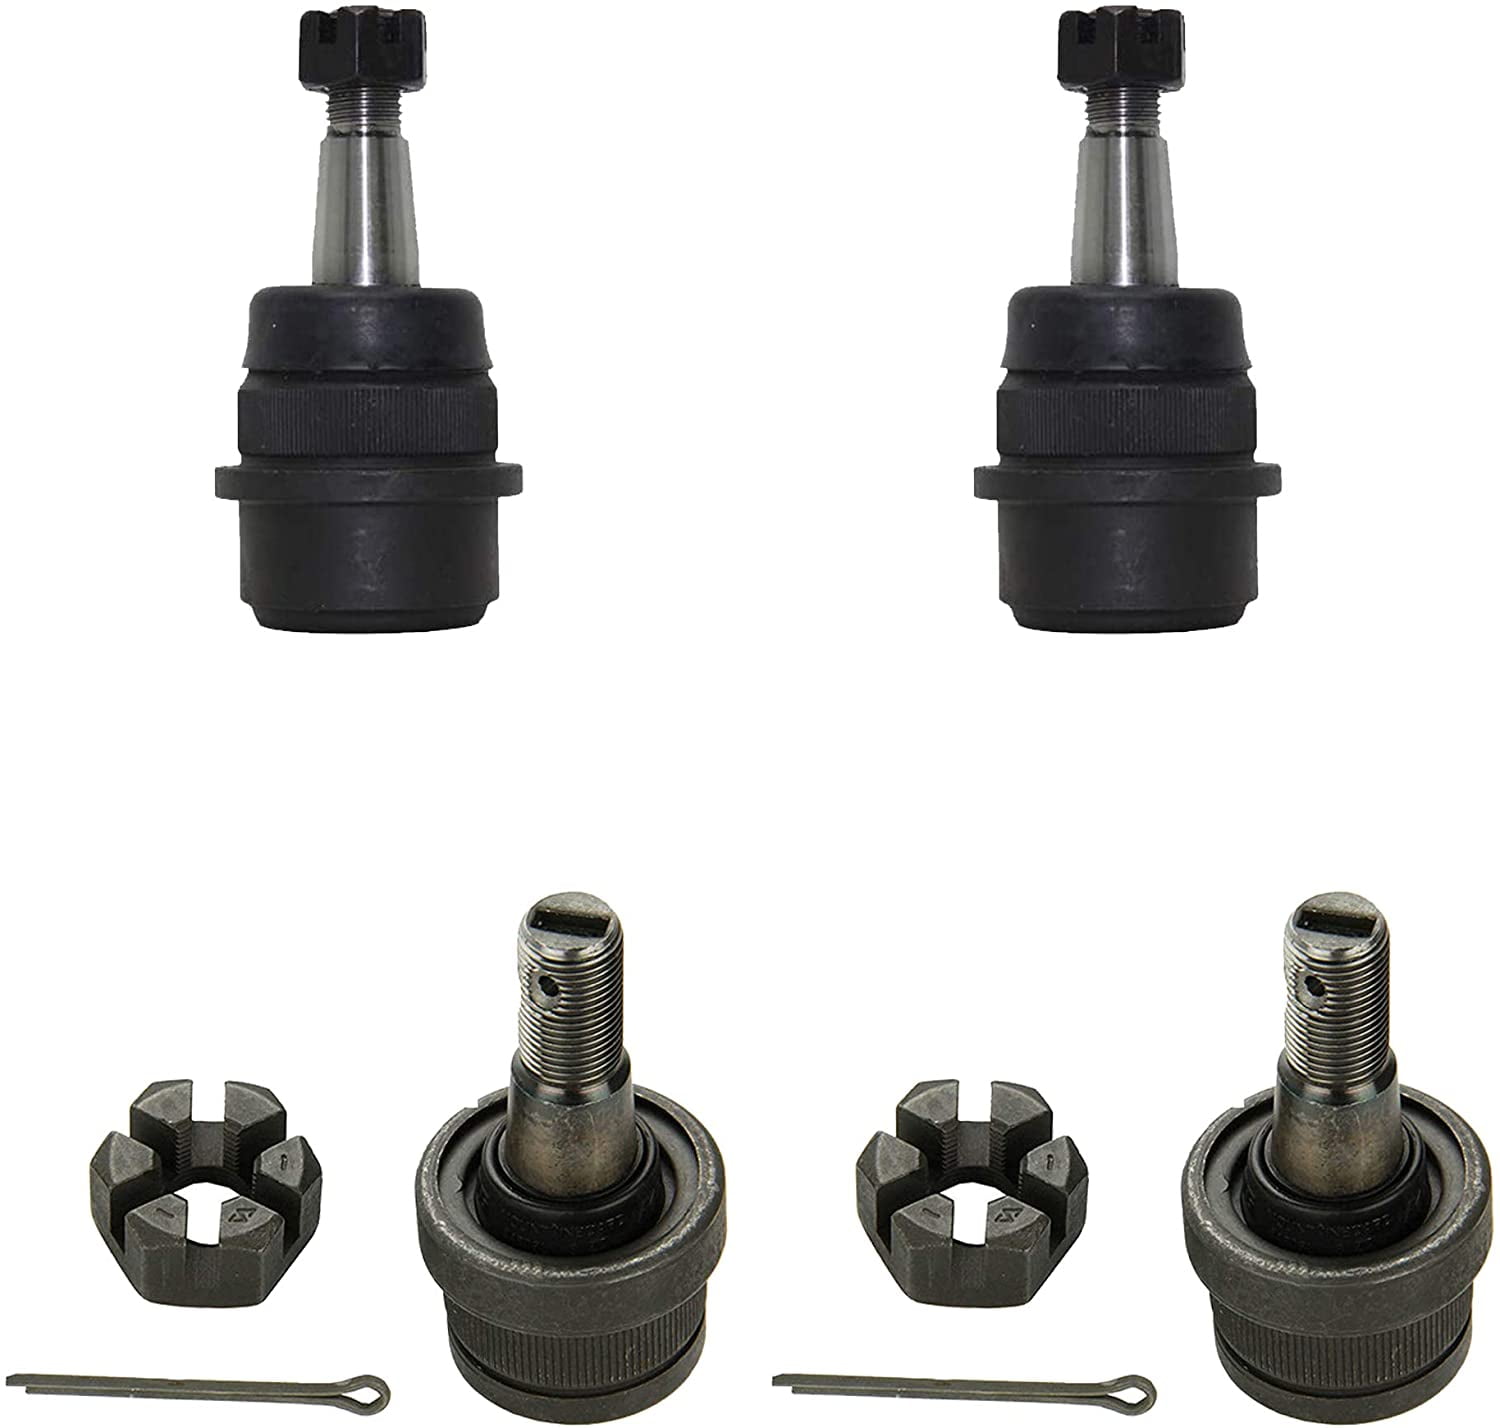 Detroit Axle - 4WD Front Upper Lower Ball Joints Replacement for Jeep Grand  Cherokee Wrangler Comanche Wagoneer - 4pc Set 